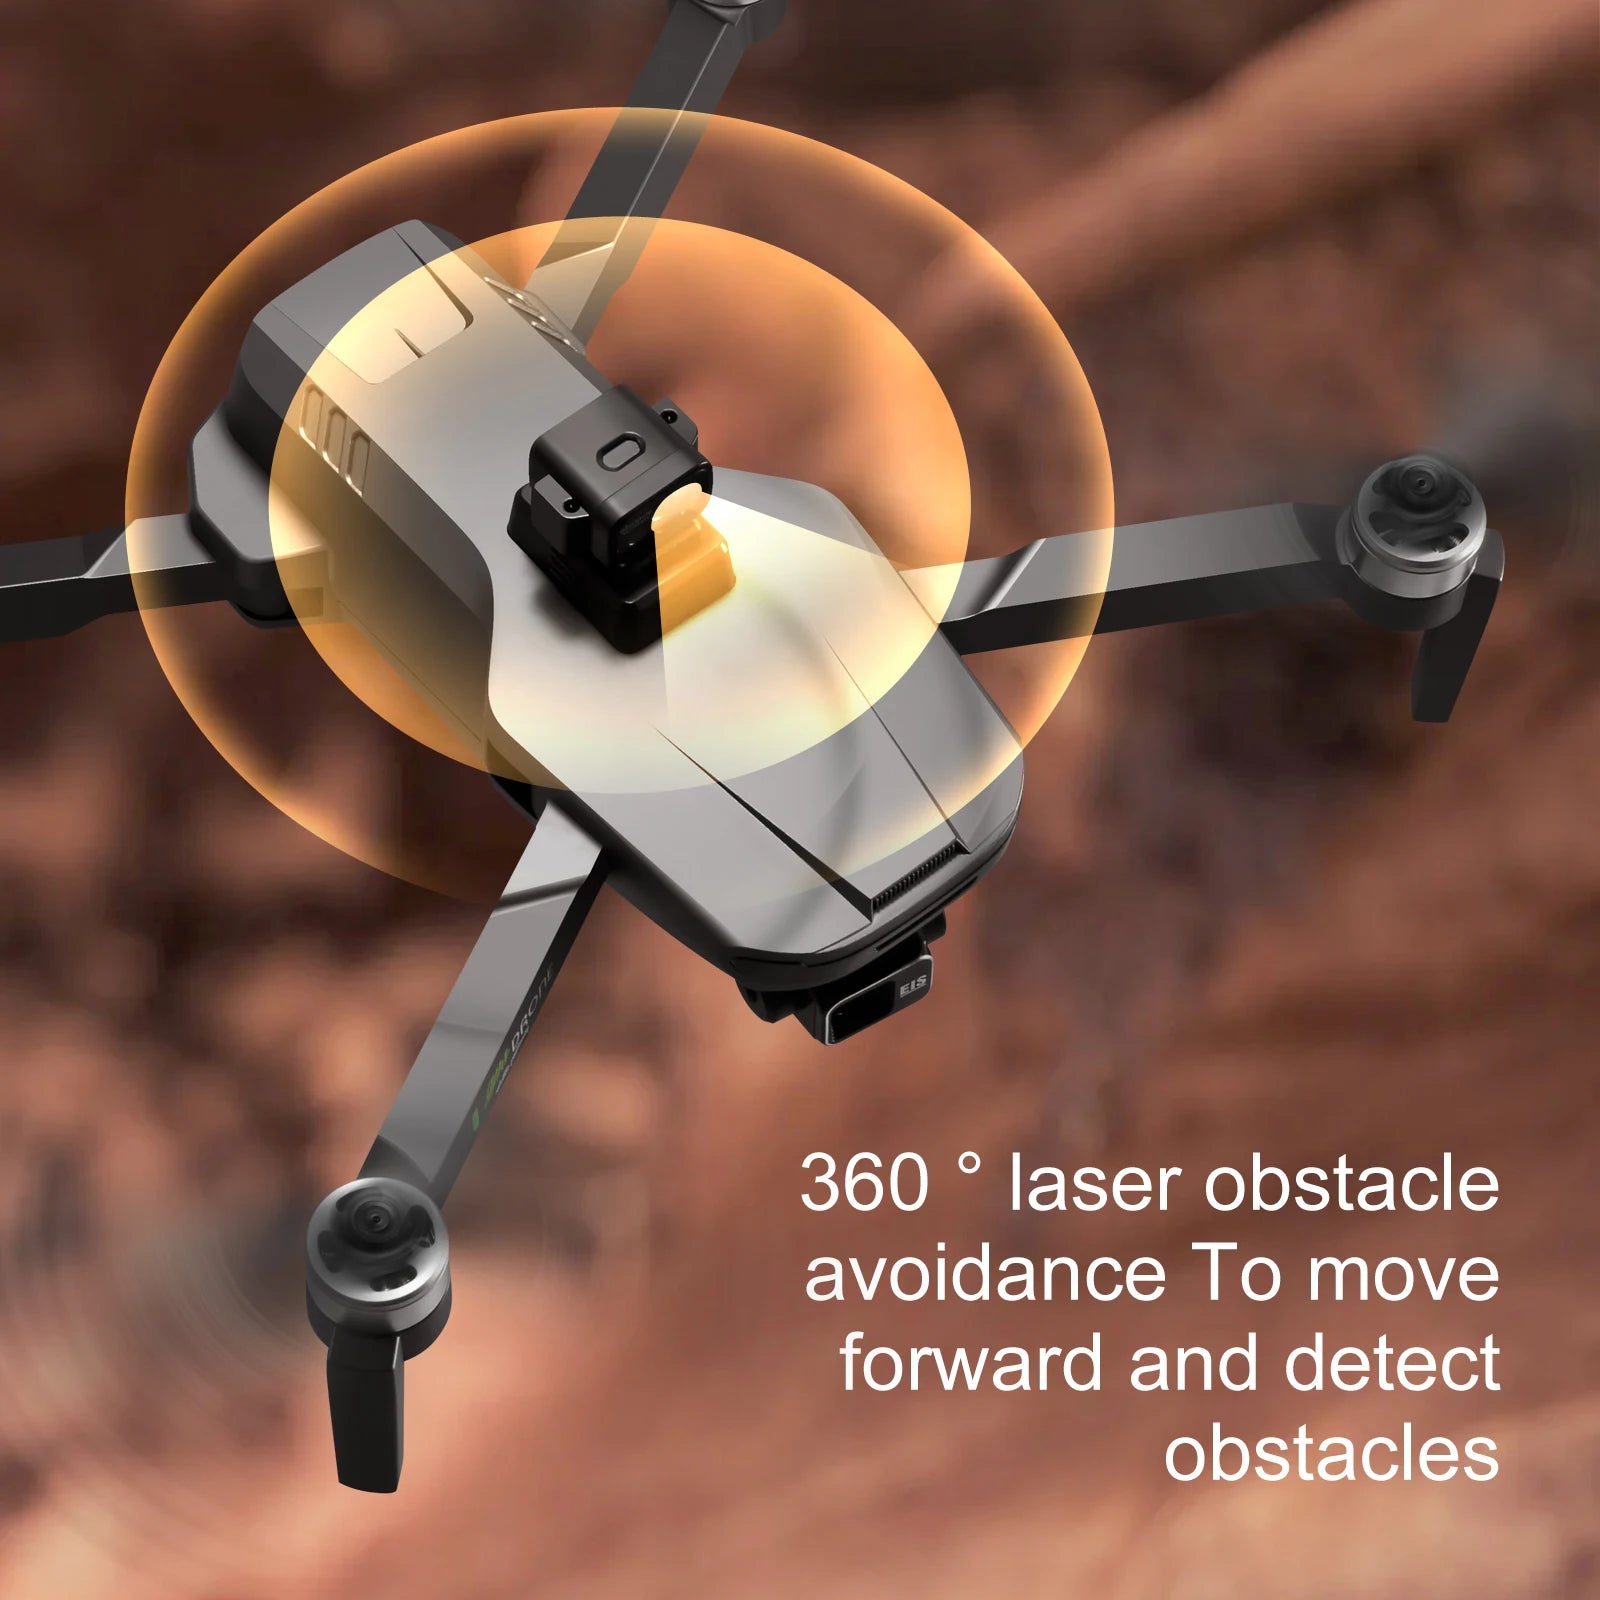 S155 Drone, 360-degree laser obstacle avoidance To move forward